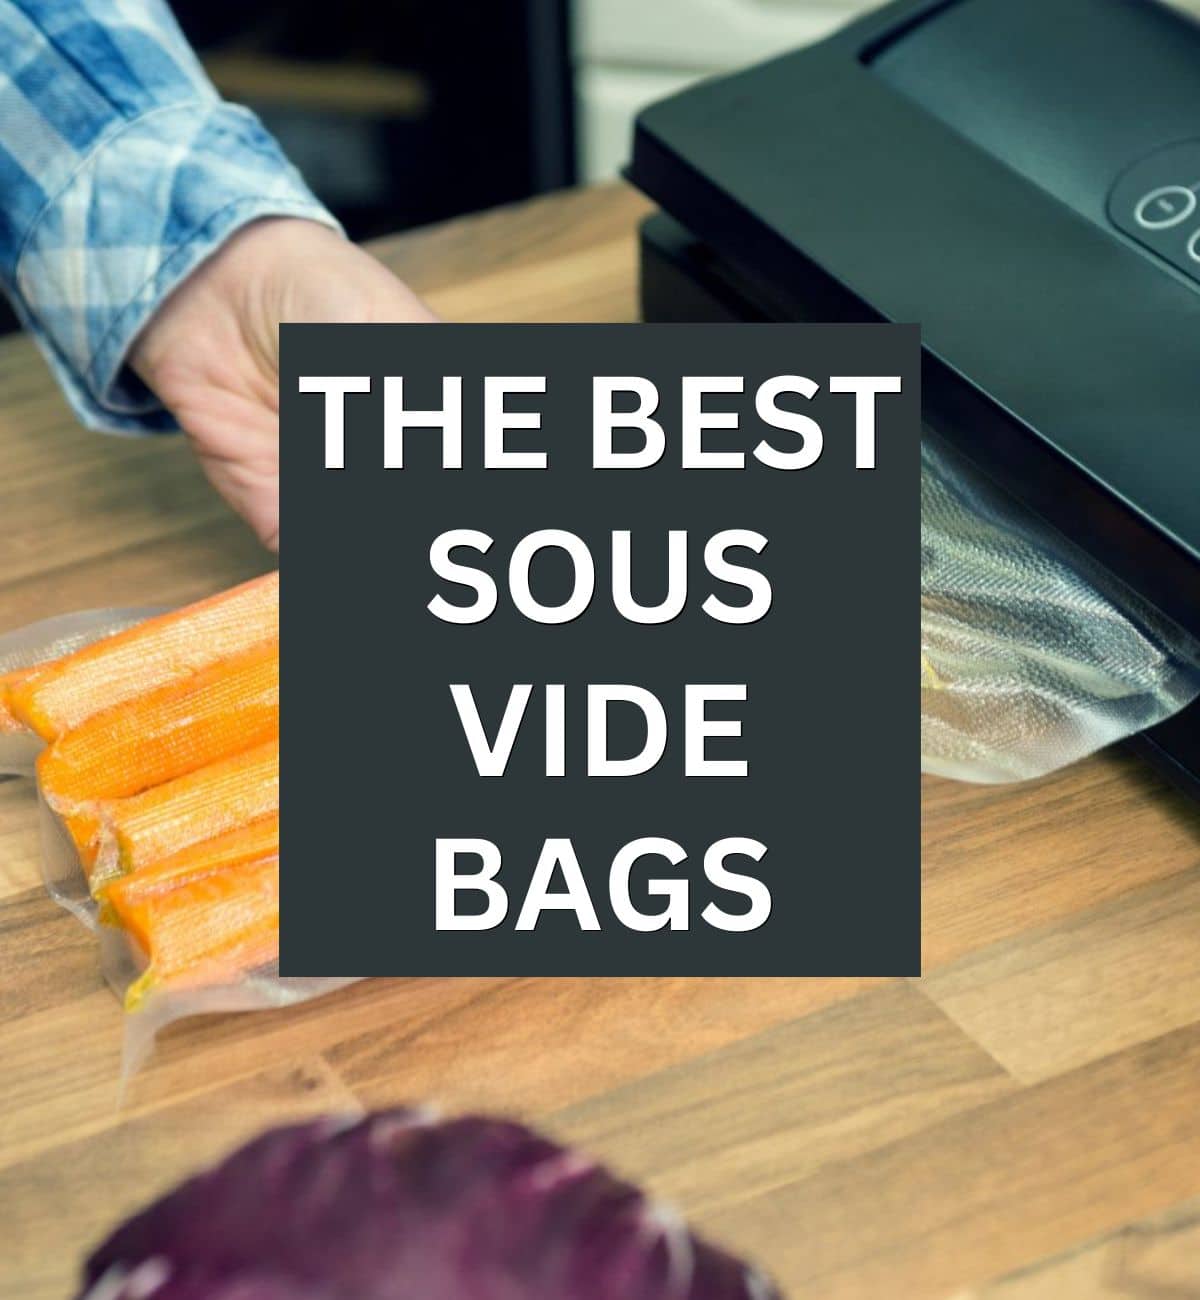 How to Use a Sous Vide Cooker and Vacuum Sealer to Make the Best